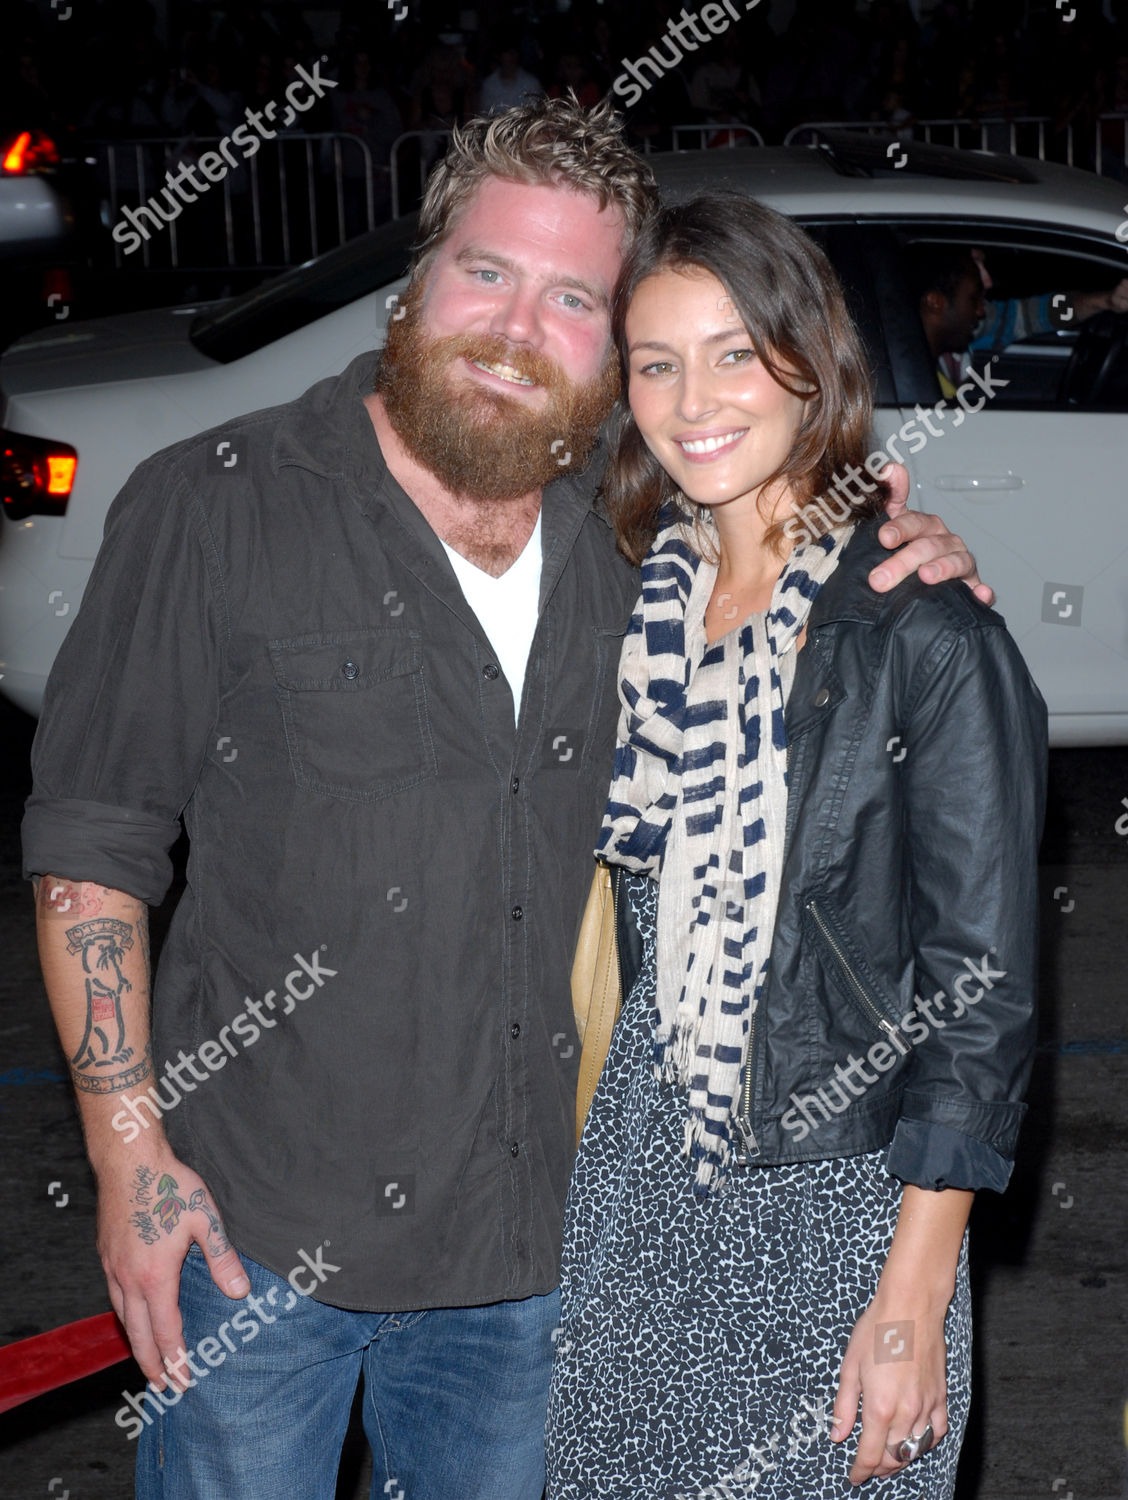  Ryan Dunn at the “Jackass 3D” Los Angeles Premiere with his girlfriend, Picture Source: